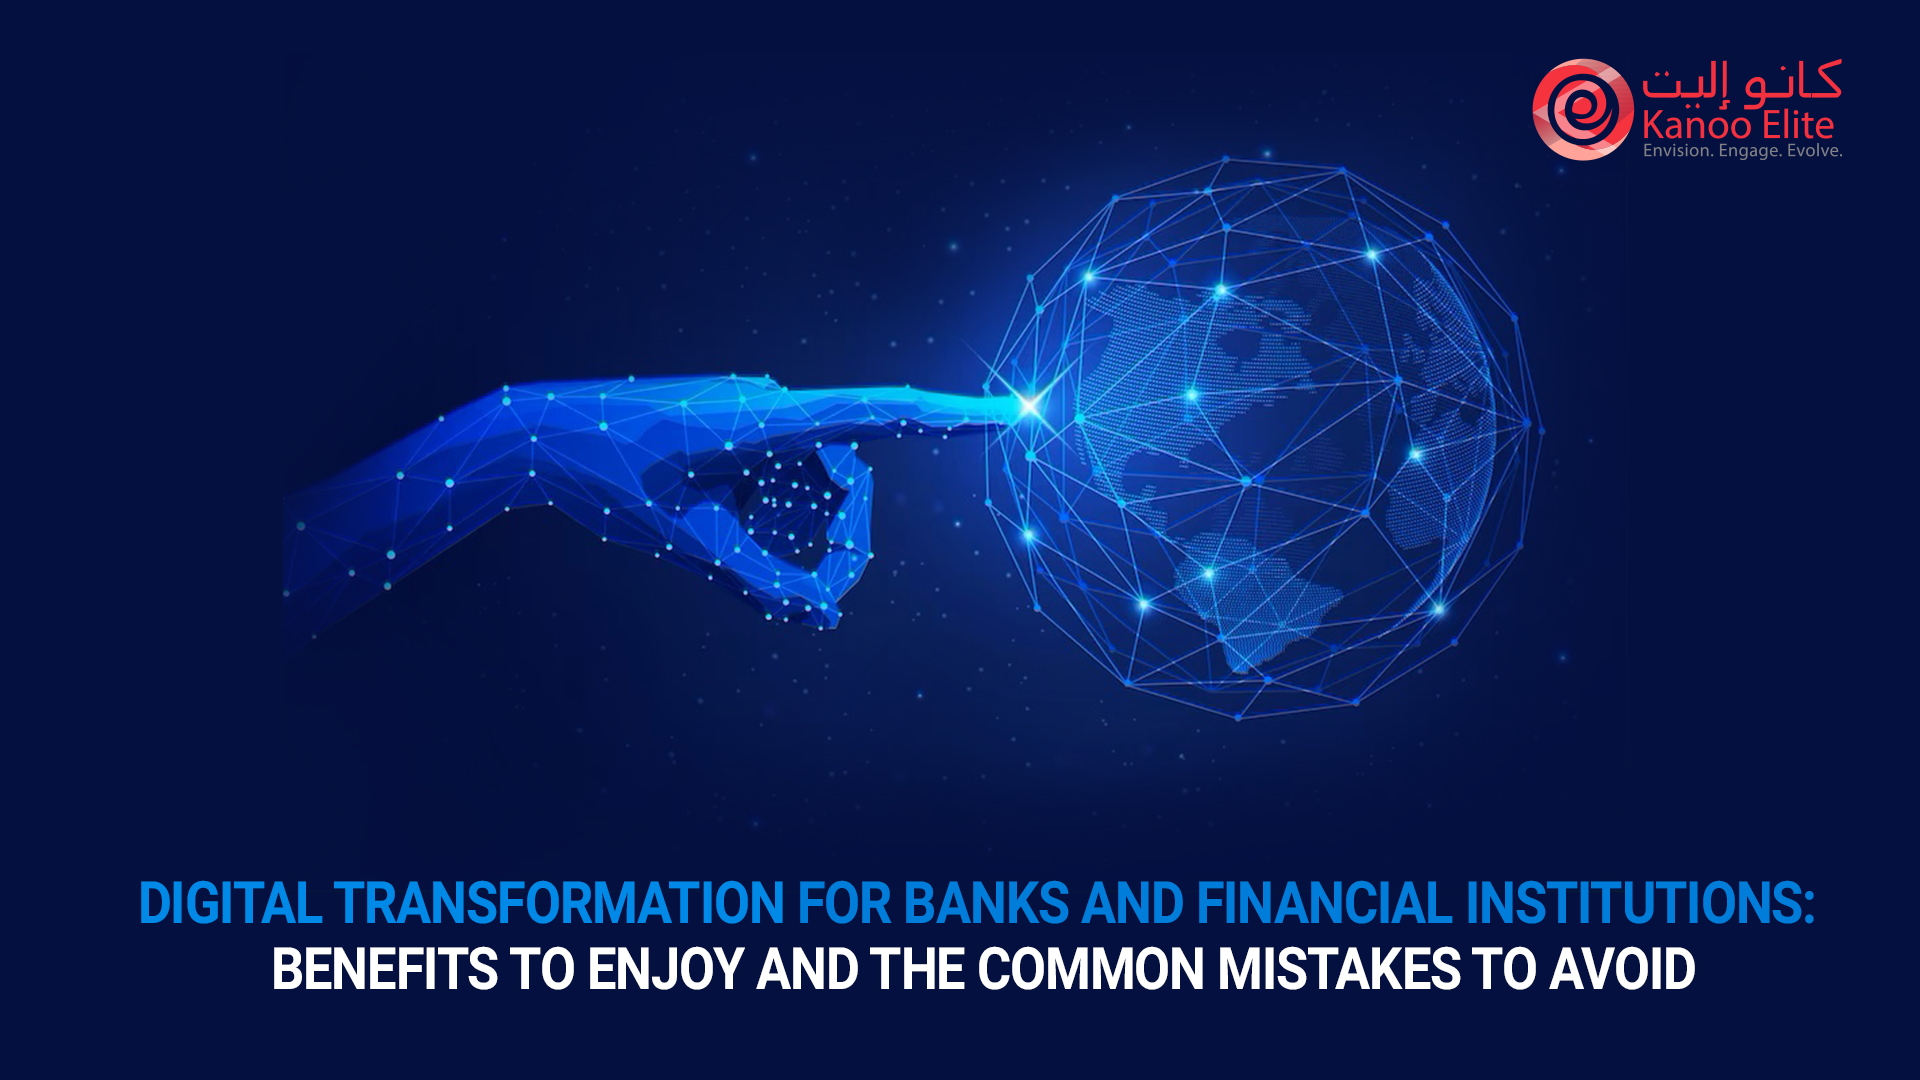 Digital Transformation for Banks and Financial Institutions: Benefits to Enjoy and the Common Mistakes to Avoid